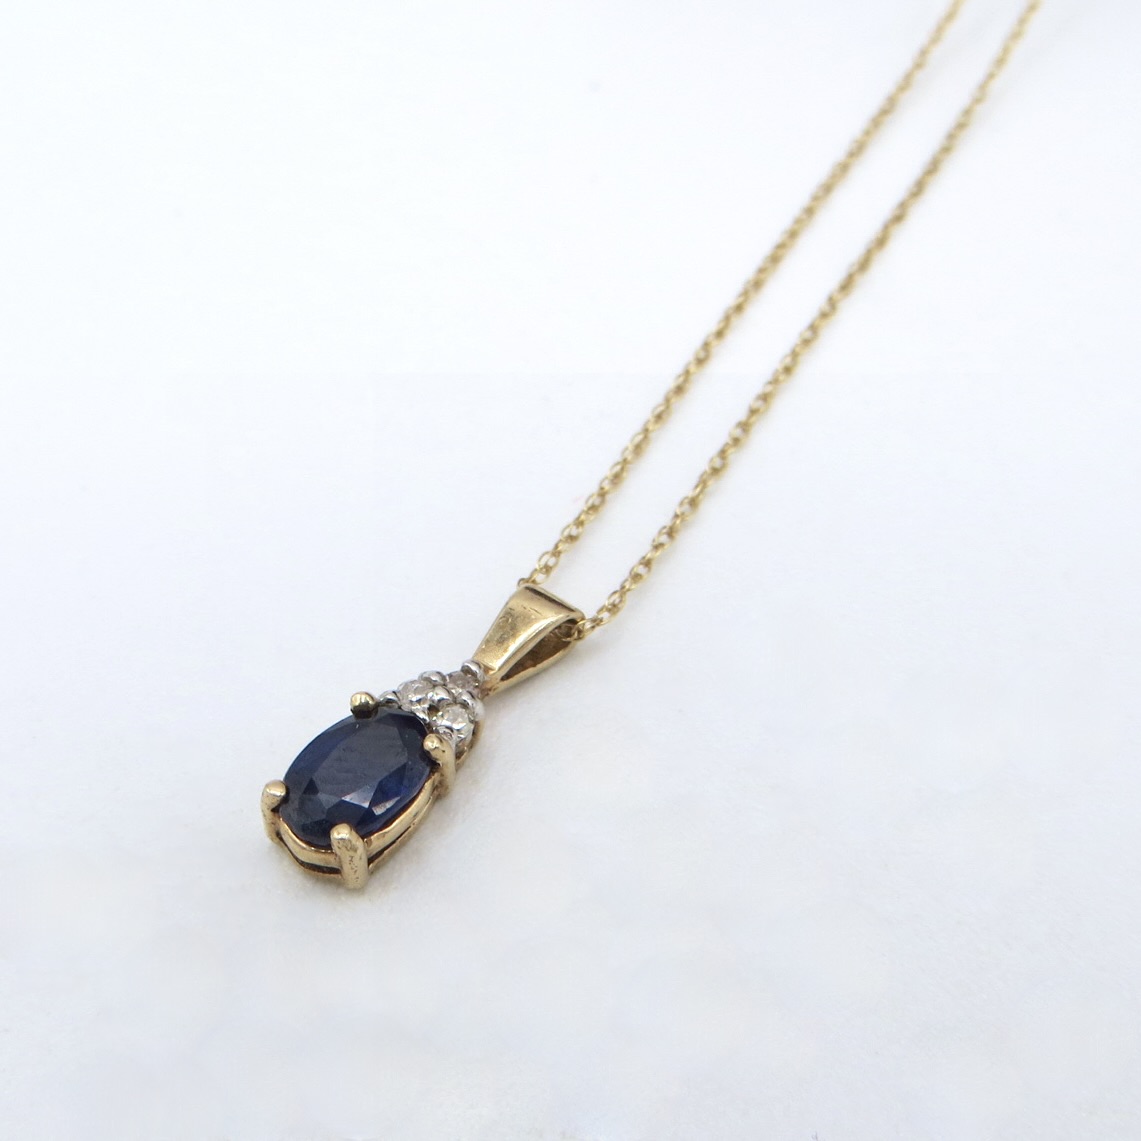 10kt Gold, Sapphire and Diamond Necklace